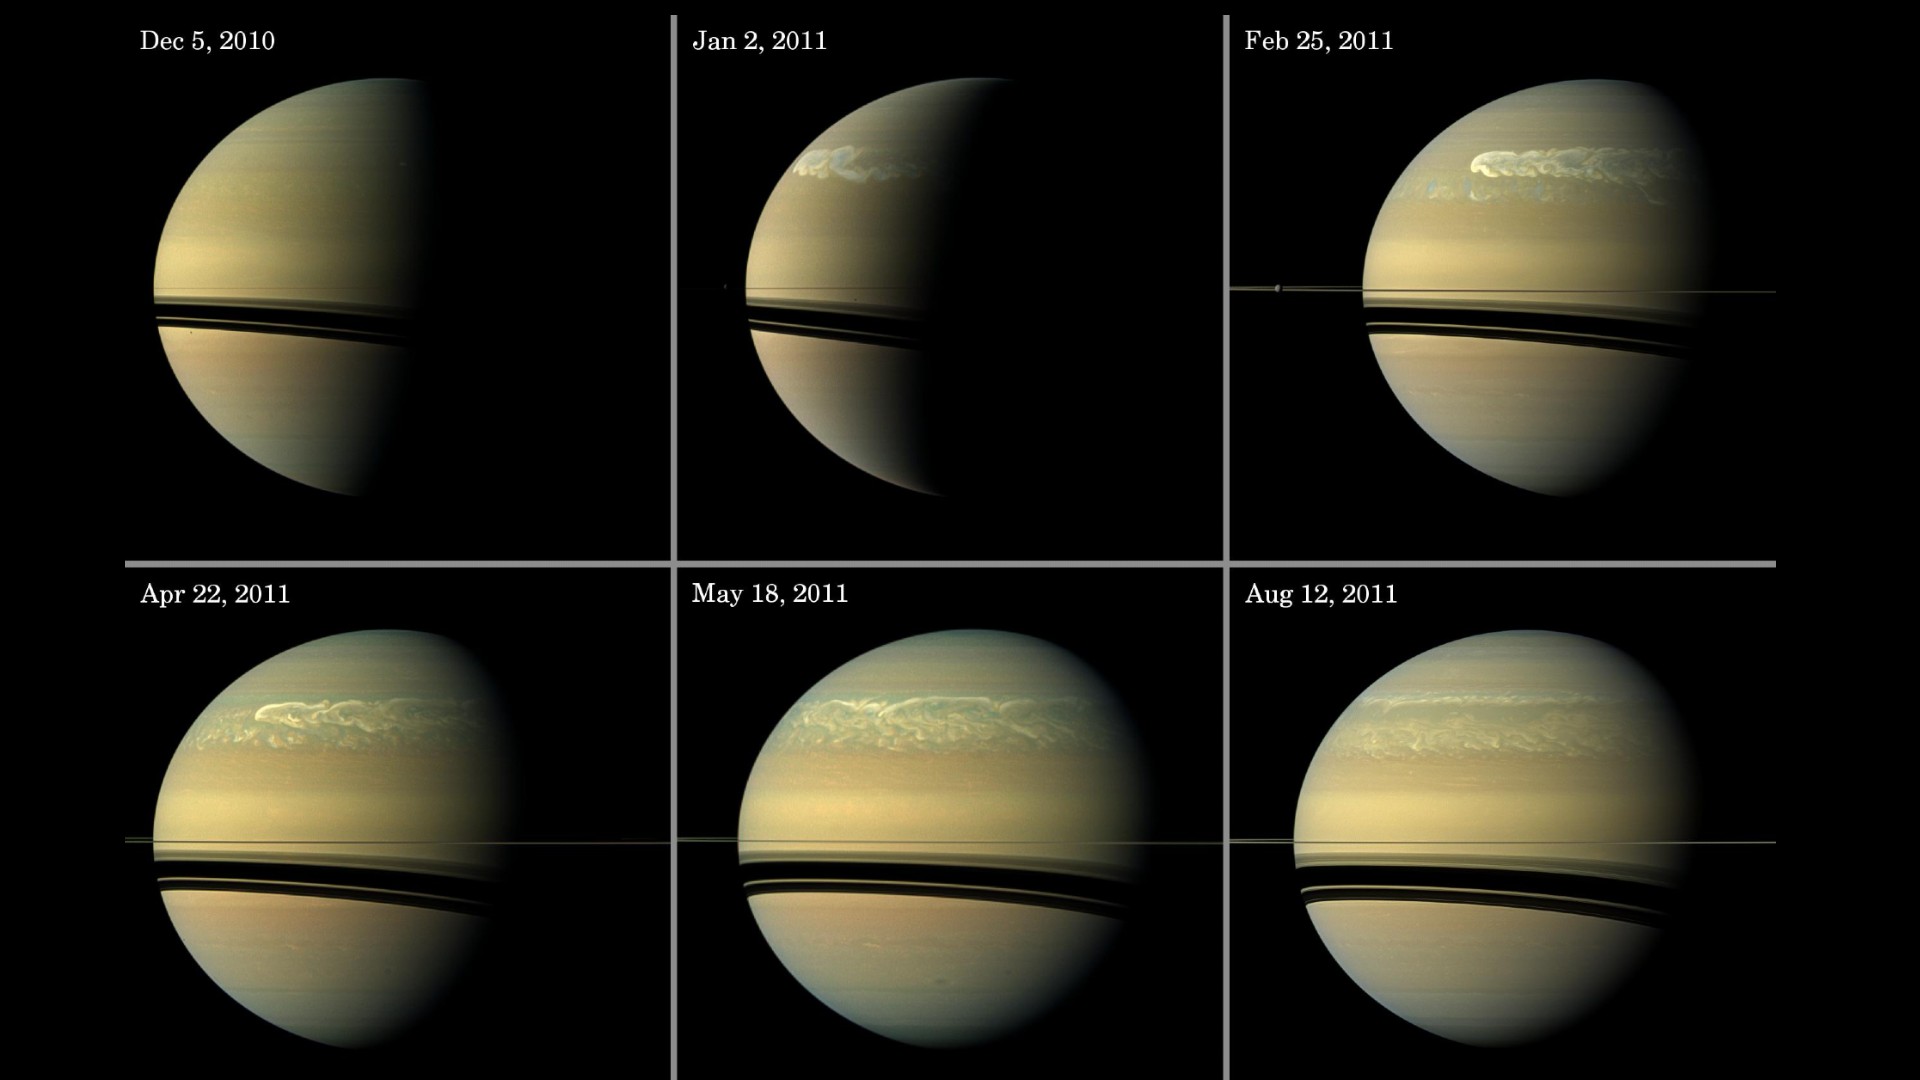 Series of images tracking the development of Saturn's giant storm, as seen at visible wavelengths during much of 2011. NASA & JPL-Caltech & Space Science Institute